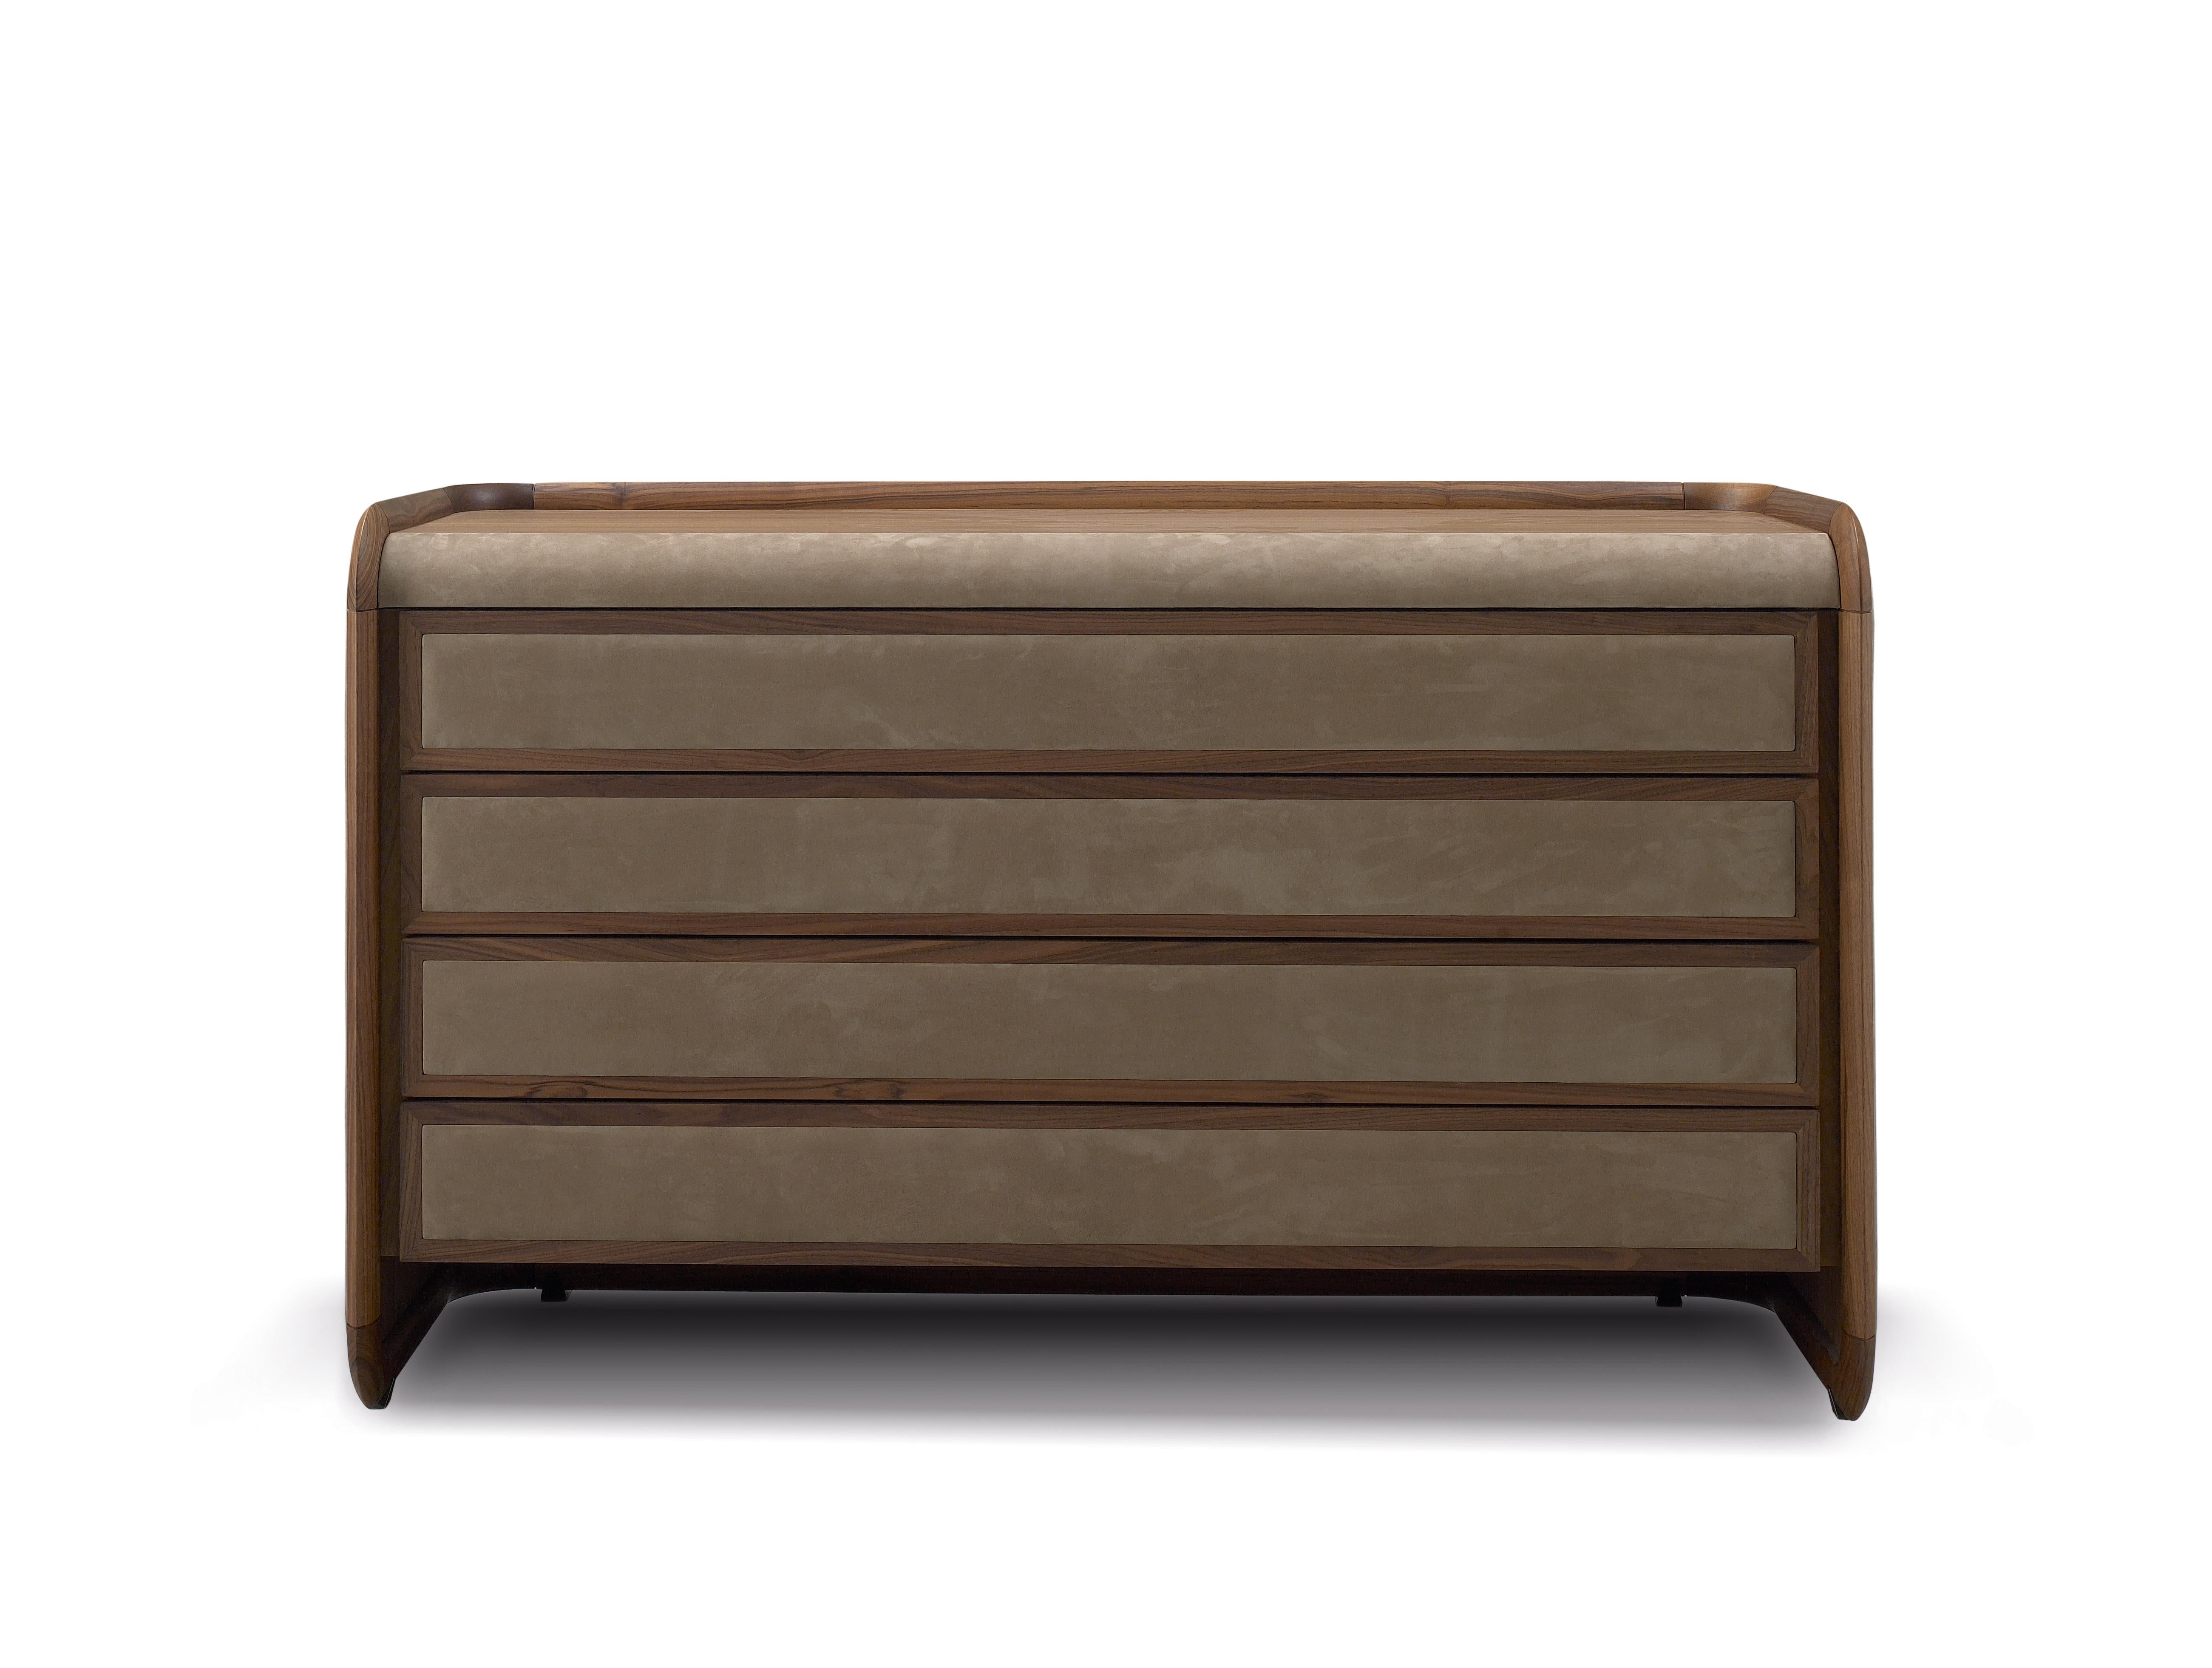 Infinity Dresser is a perfect chest of drawers with a modern and fashionable style. The warm tones of the walnut wood are matched with the best quality soft leather creating a very refined design piece. Its clear lines and proportions make it